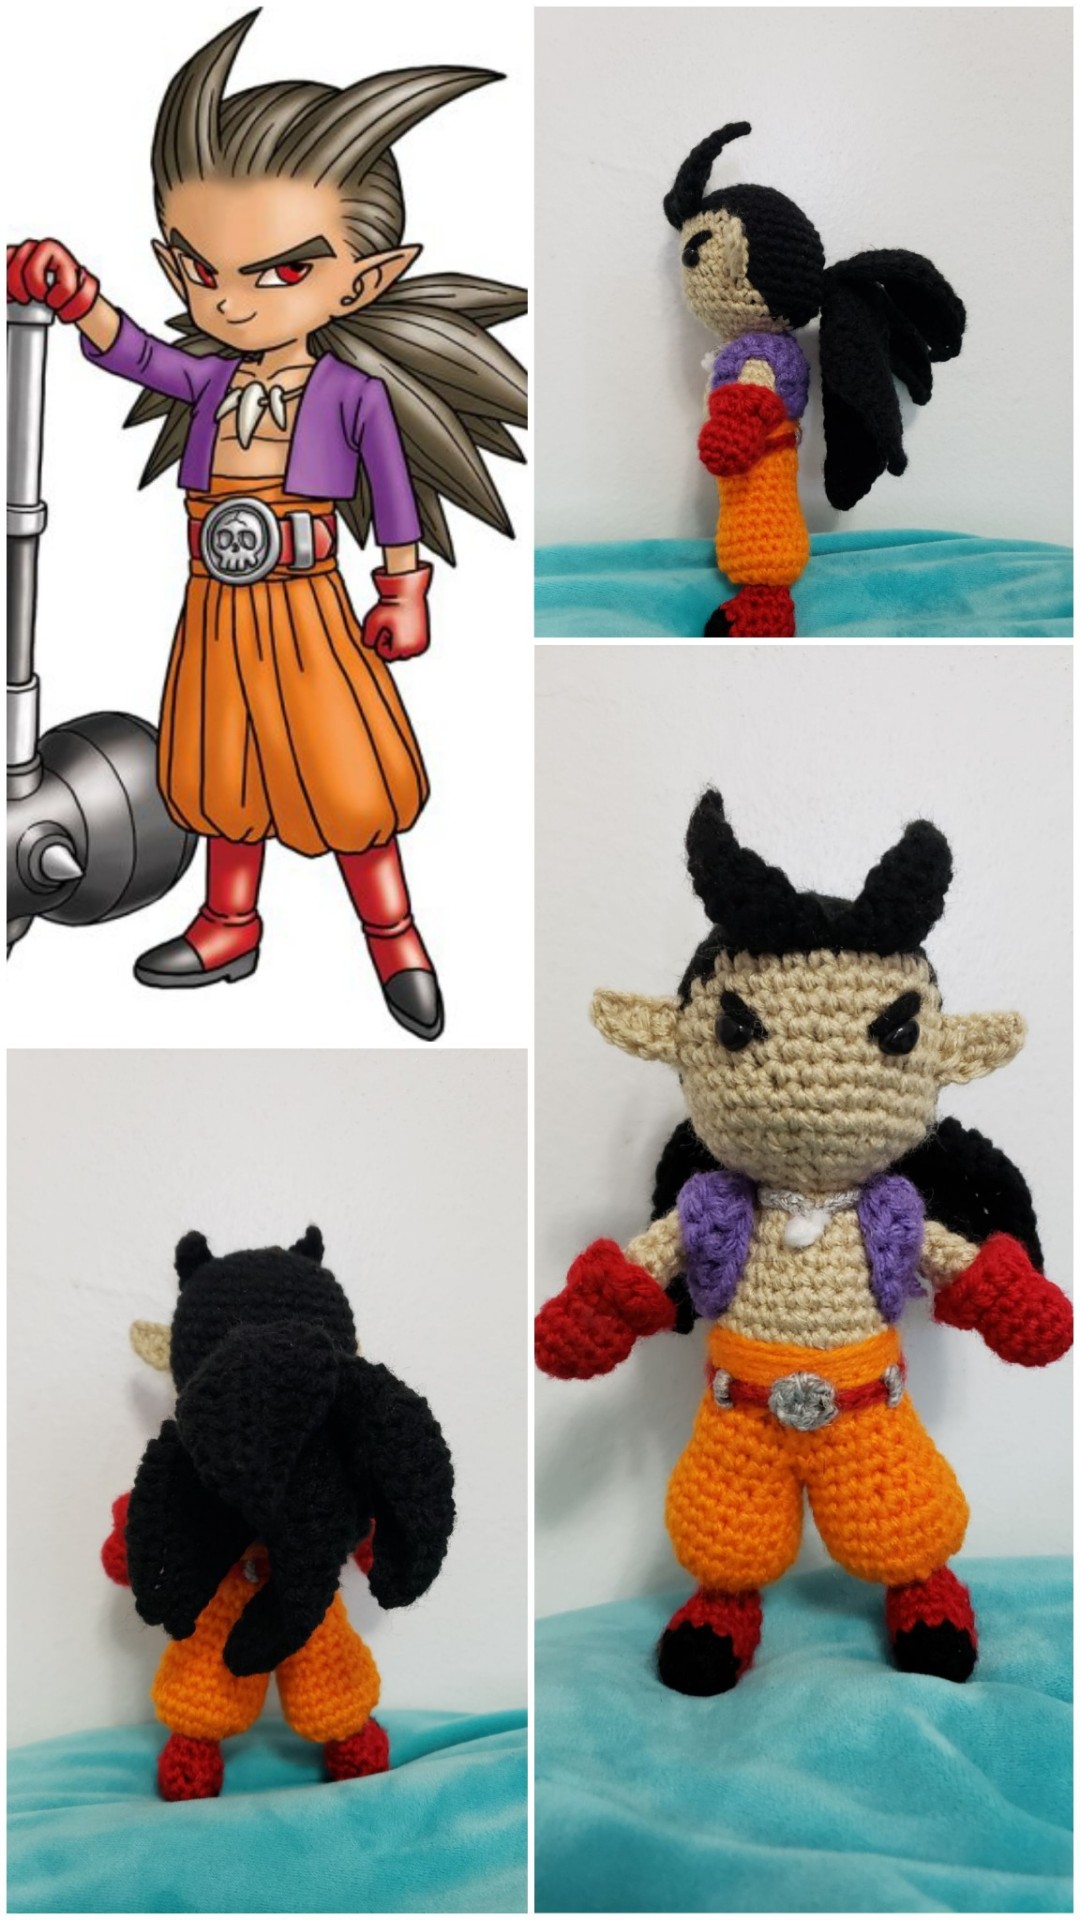 Vei-Ve's Who-knows-whats — Malroth Amigurumi, made for the children.